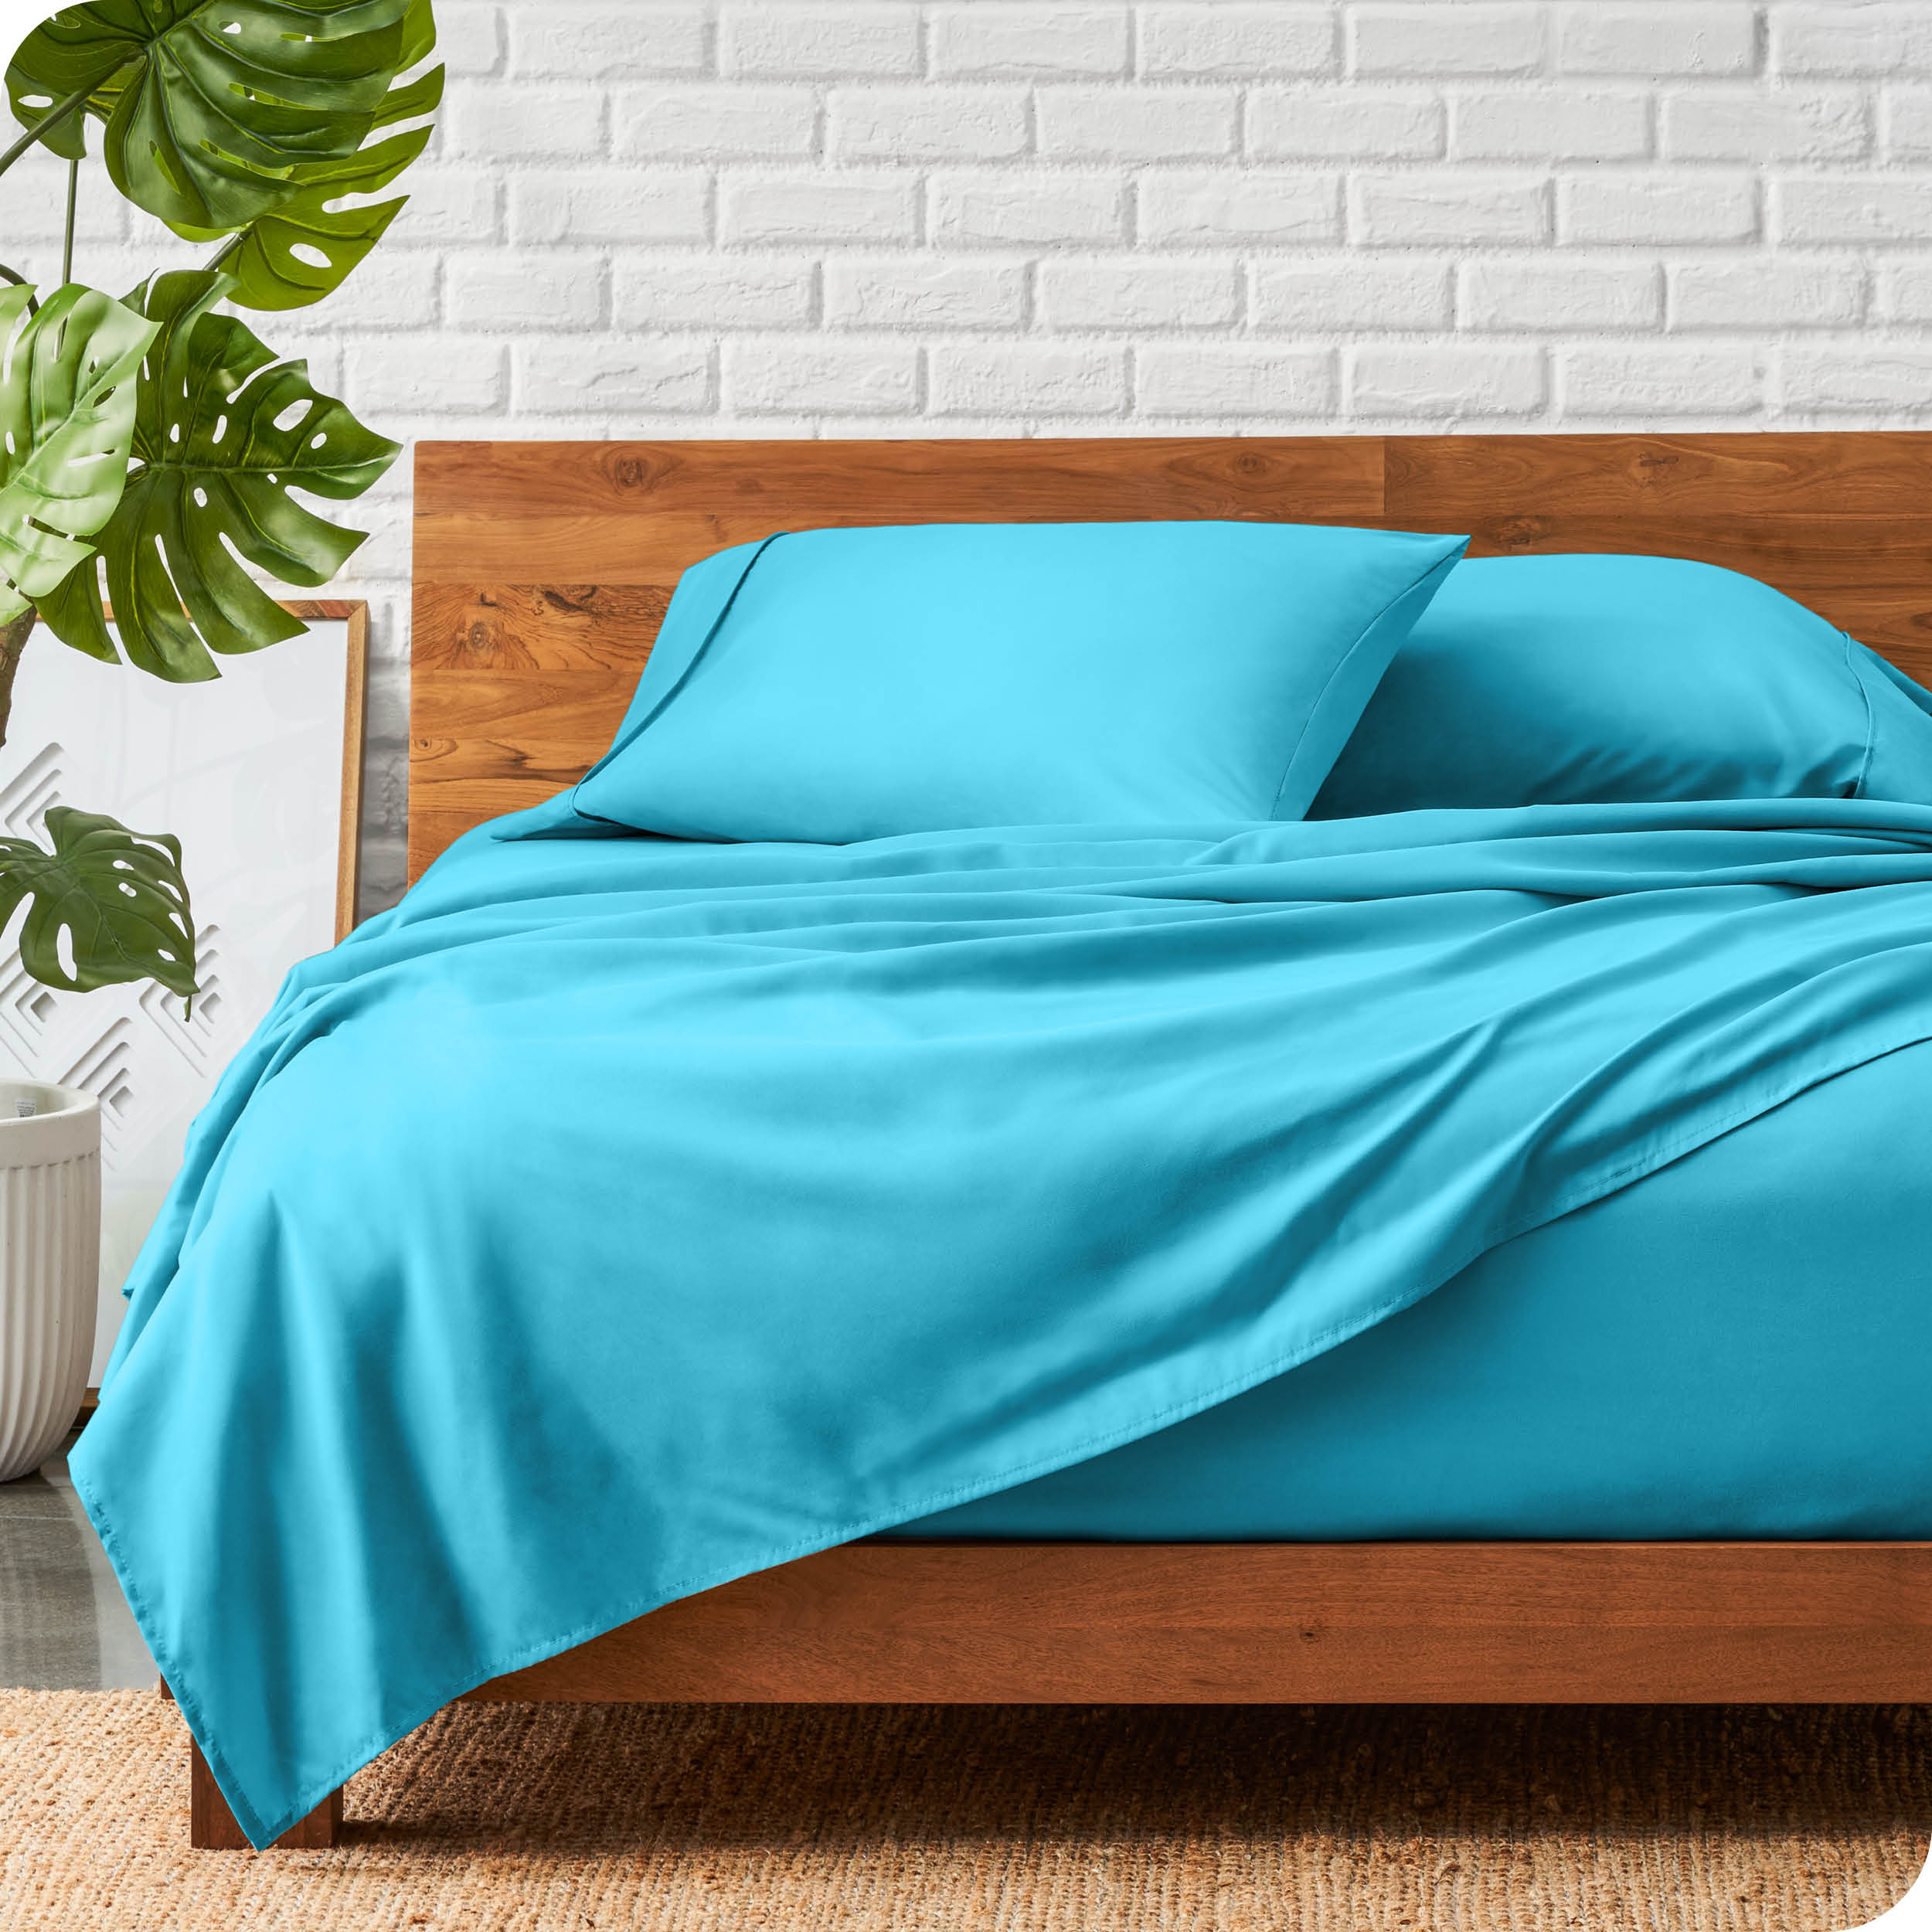 Microfiber Hydro-Brushed Sheet Set - Queen - Queen / Turquoise